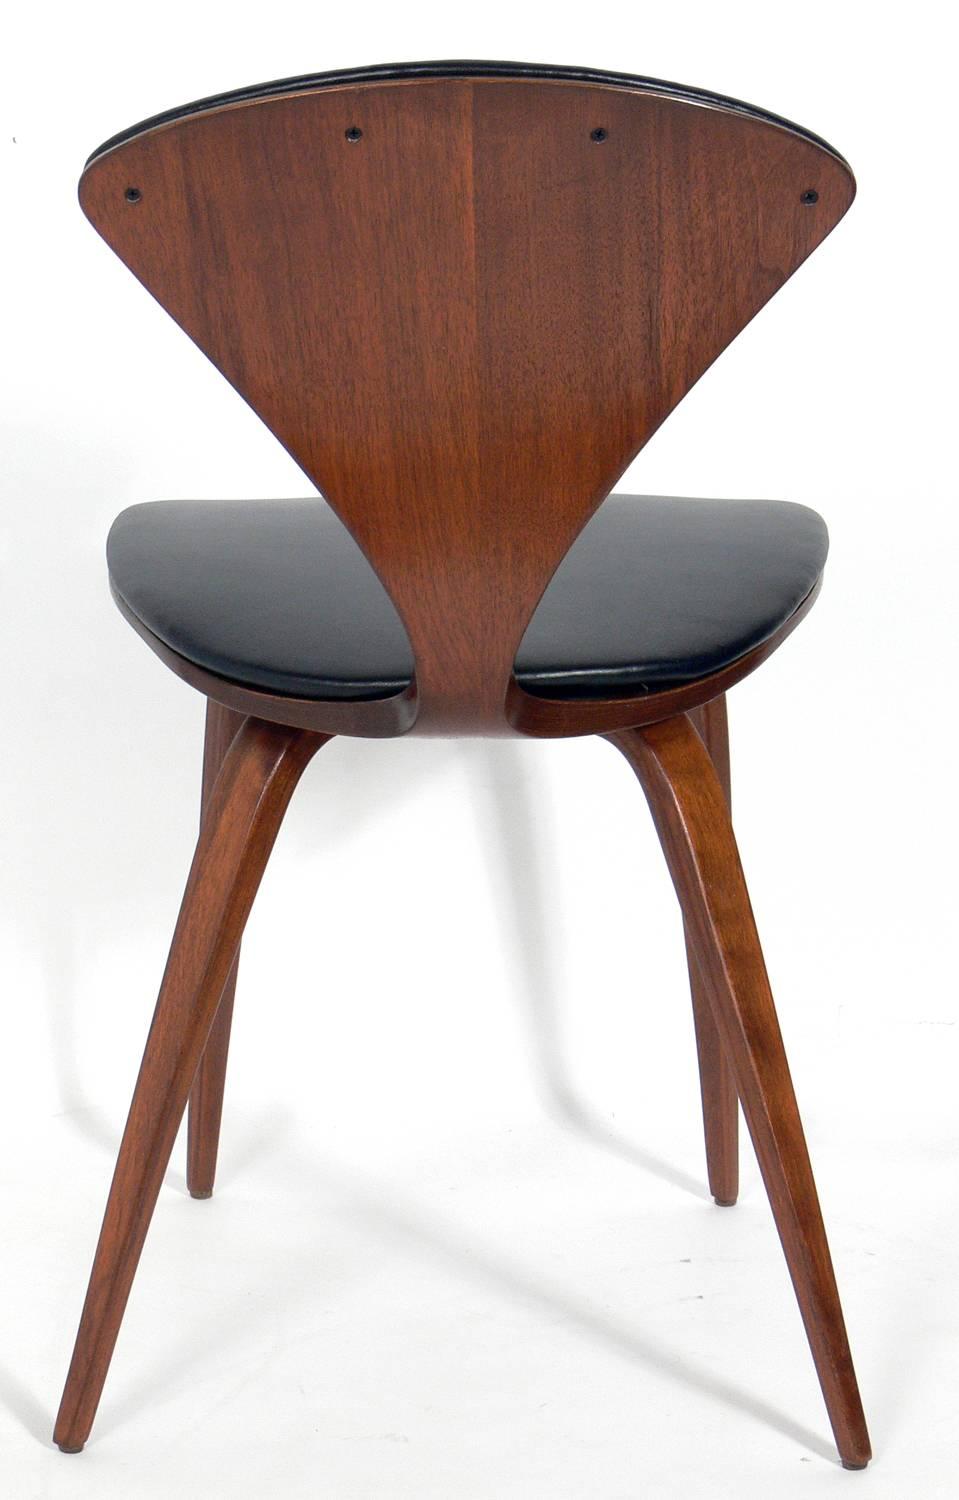 Mid-20th Century Set of 12 Sculptural Dining Chairs by Norman Cherner for Plycraft